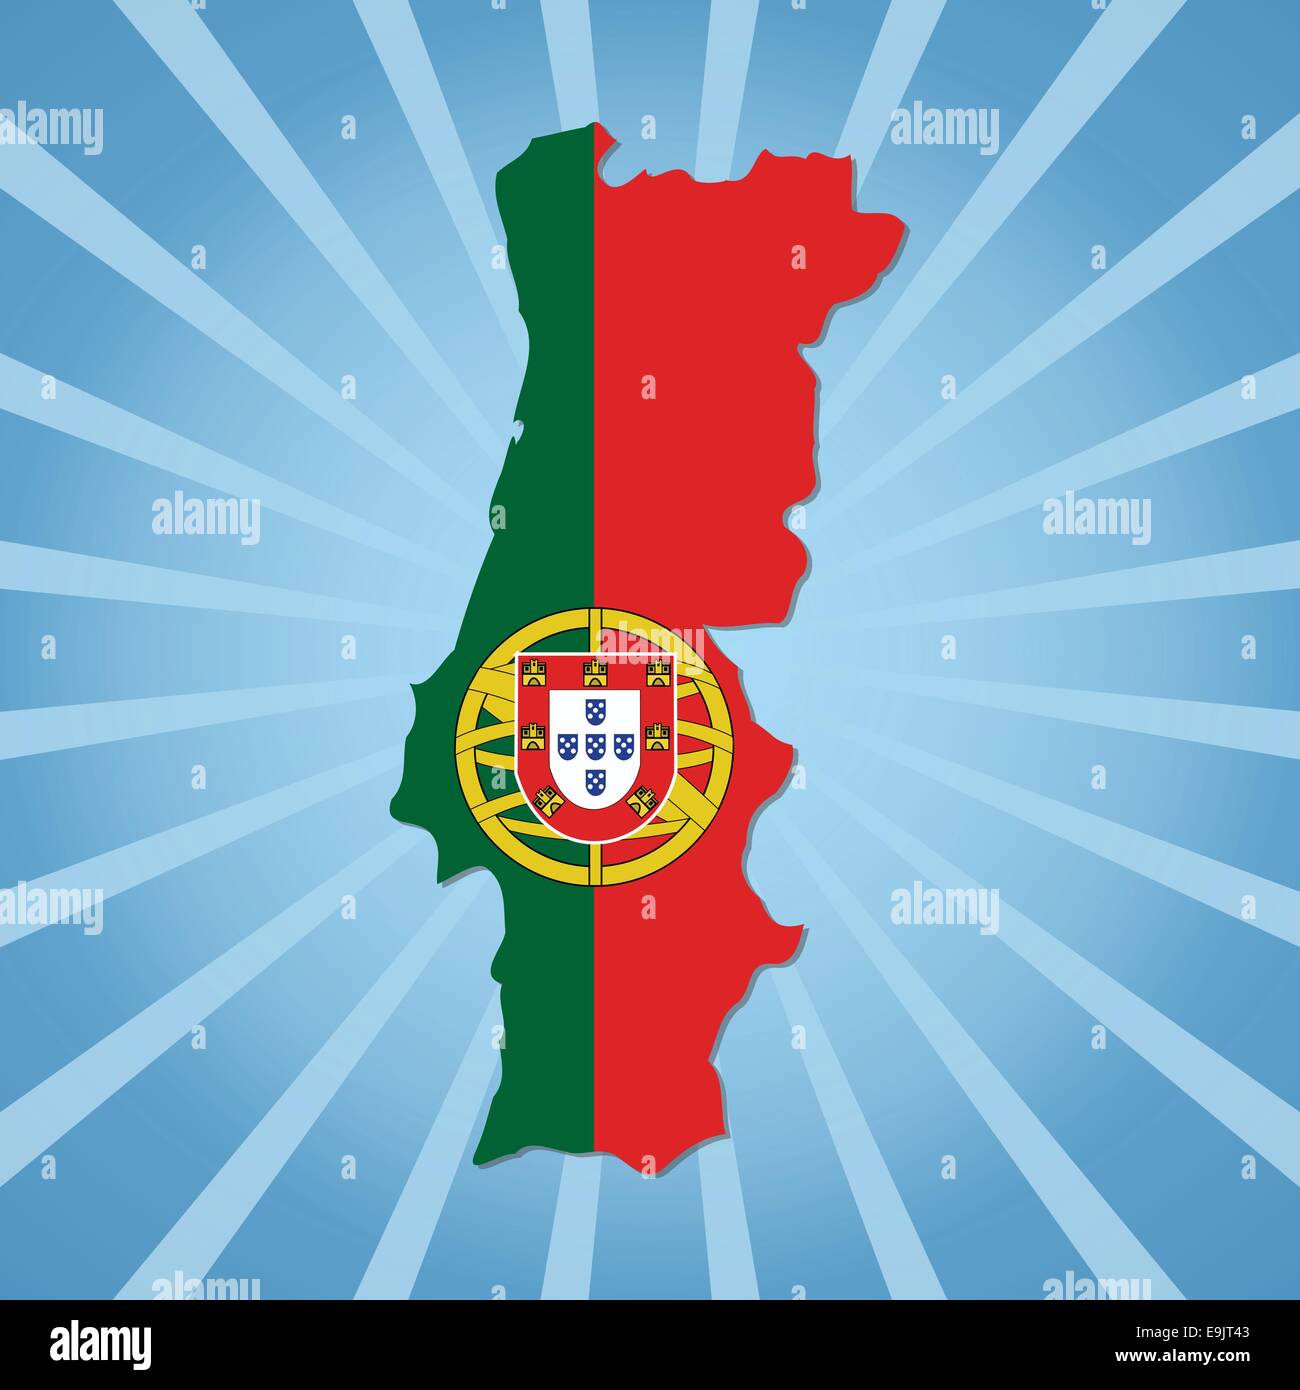 Abstract Blue World Map With Magnified Portugal. Portugal Flag And